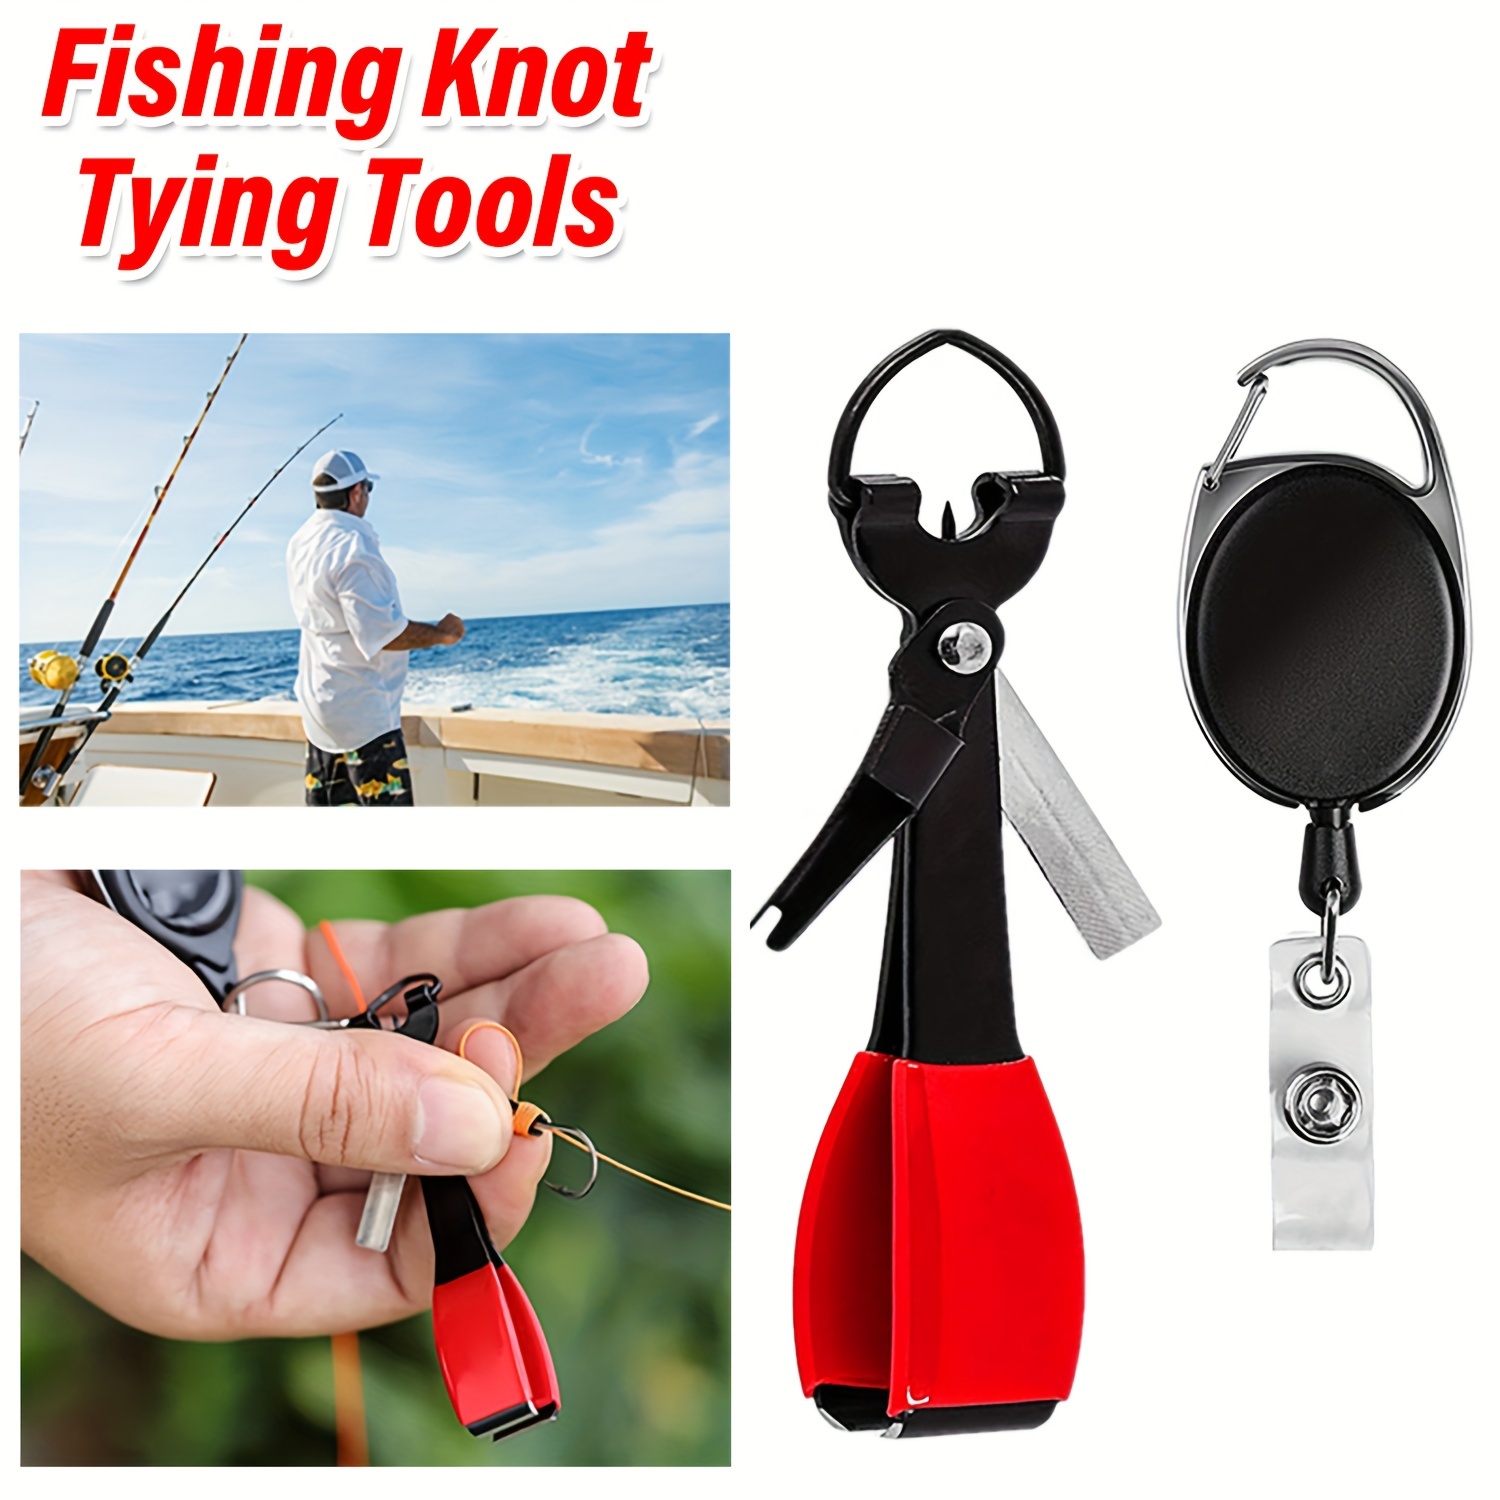 Stainless Steel Fishing Knot Tying Tool #1916 – Tidy Crafts /New Phase Fly  Fishing